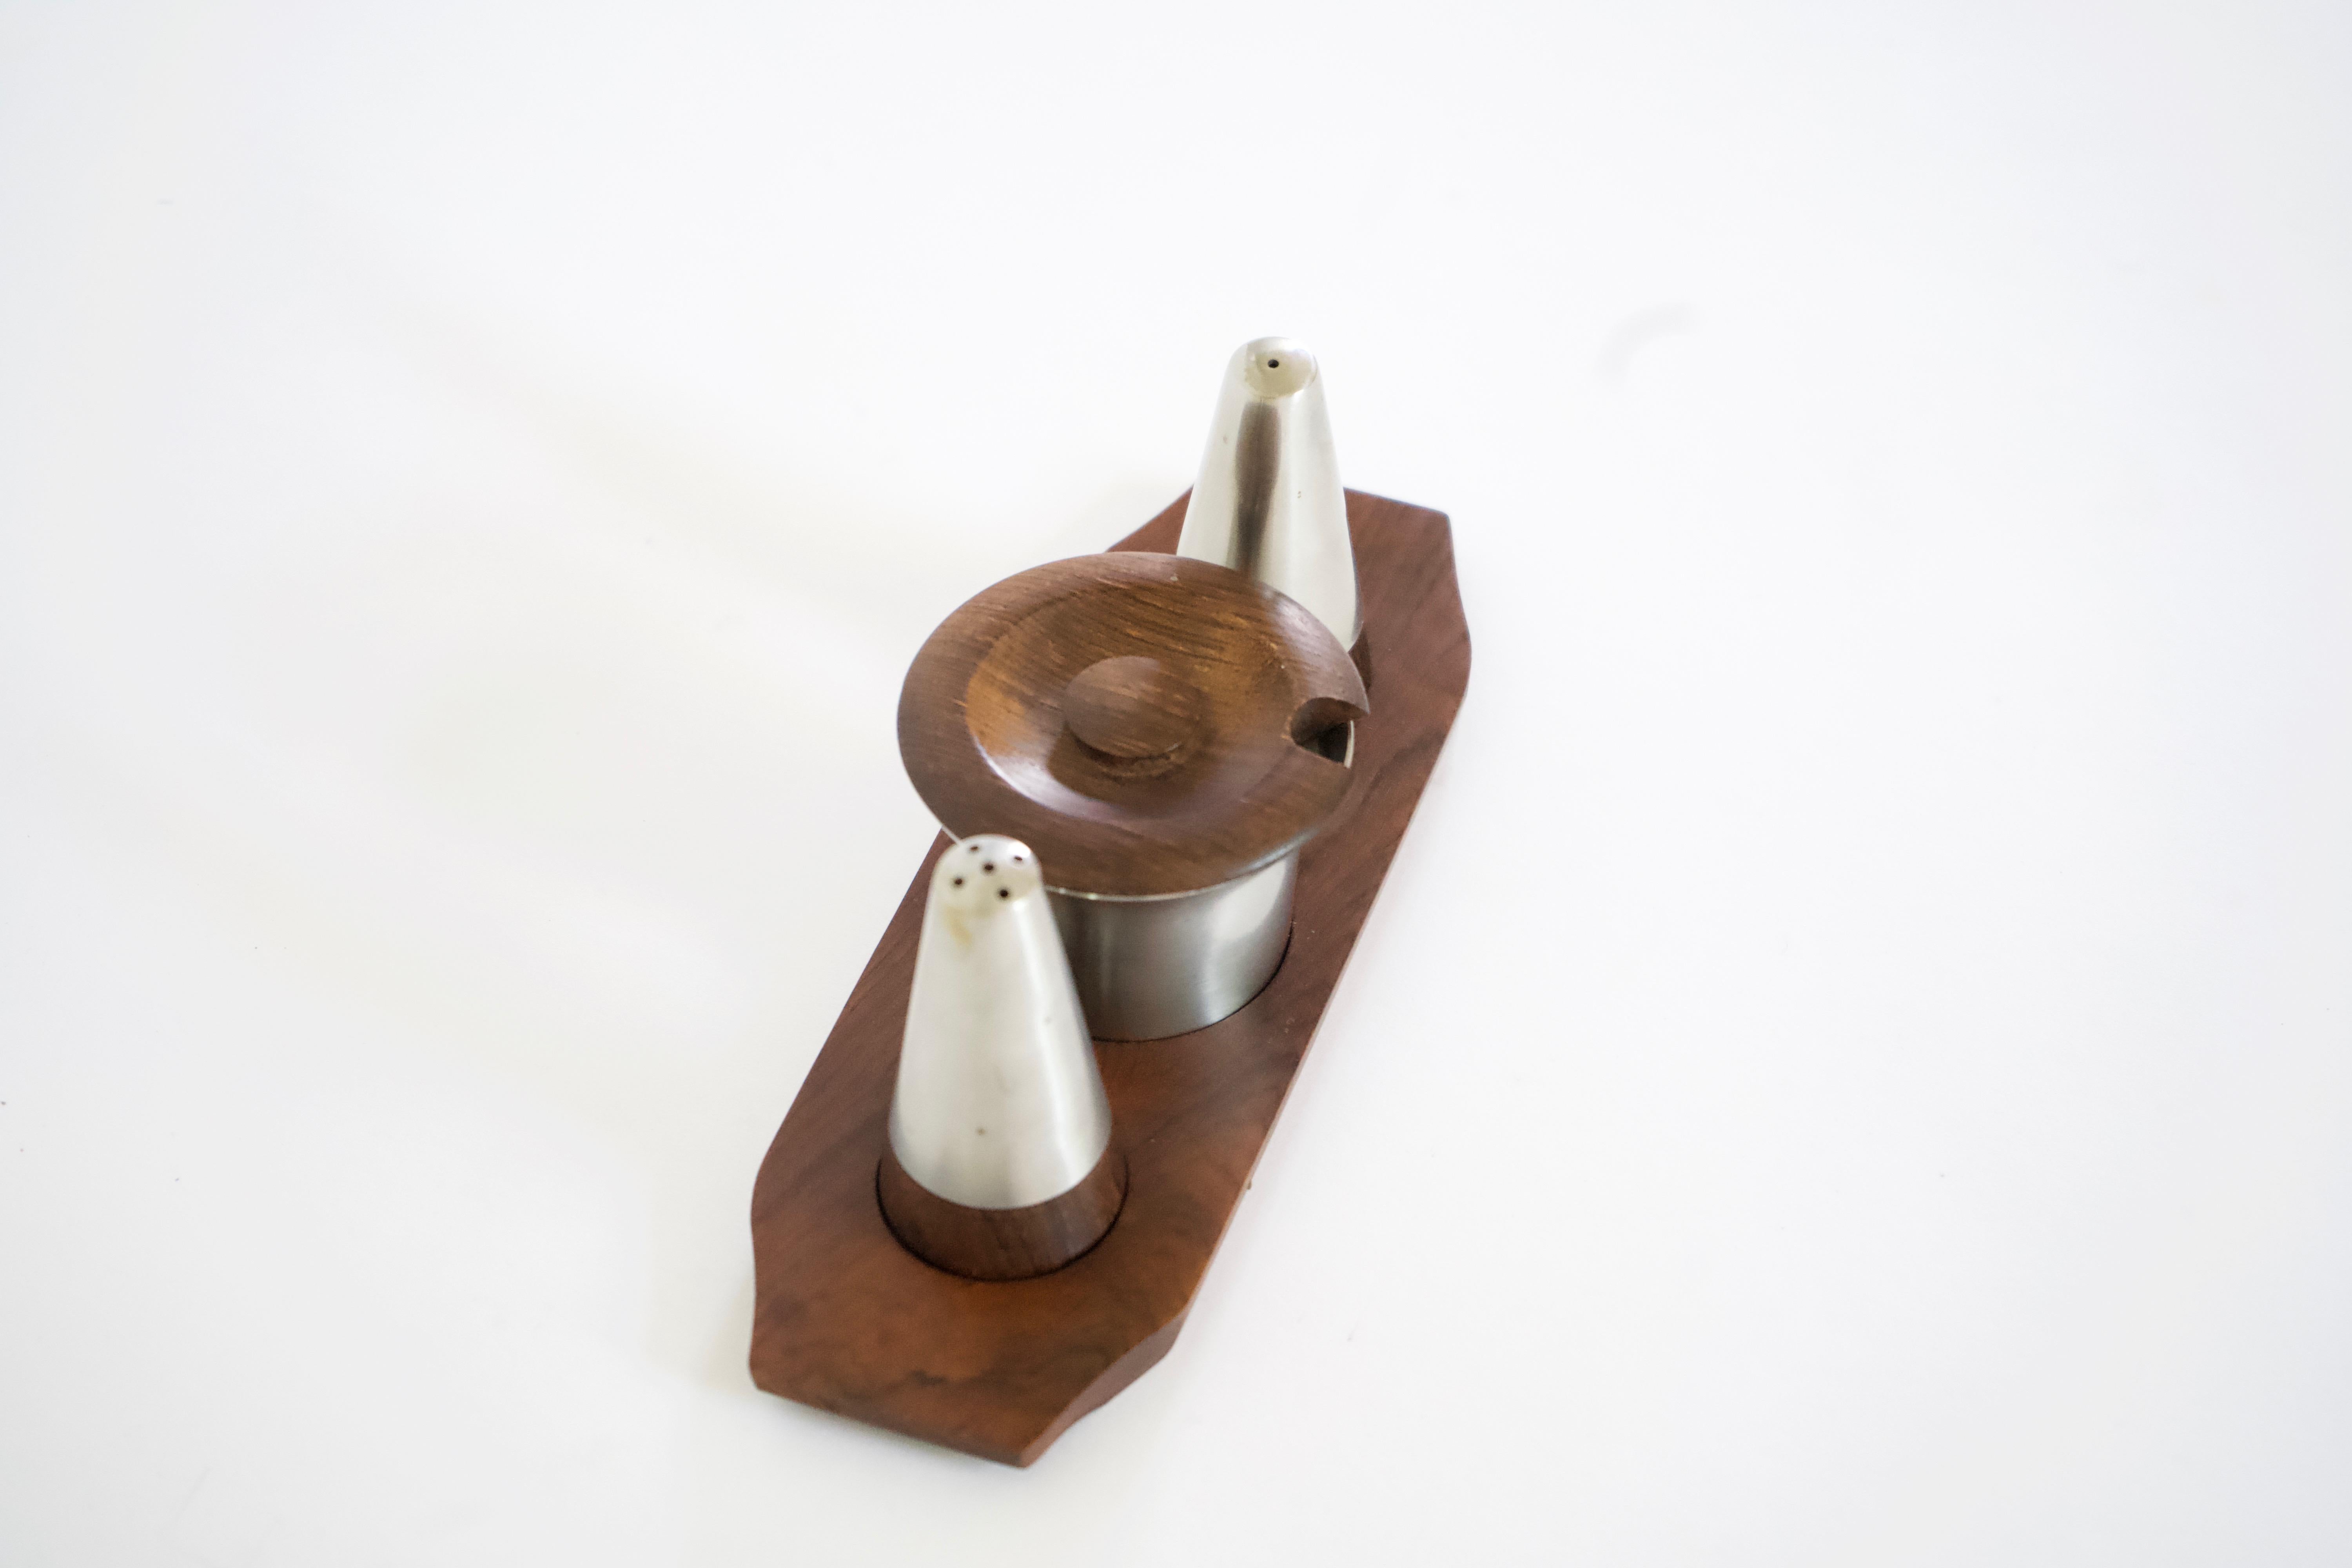 Vintage rosewood and stainless steel constructed salt, pepper and sugar set by Lundtofte, Denmark.